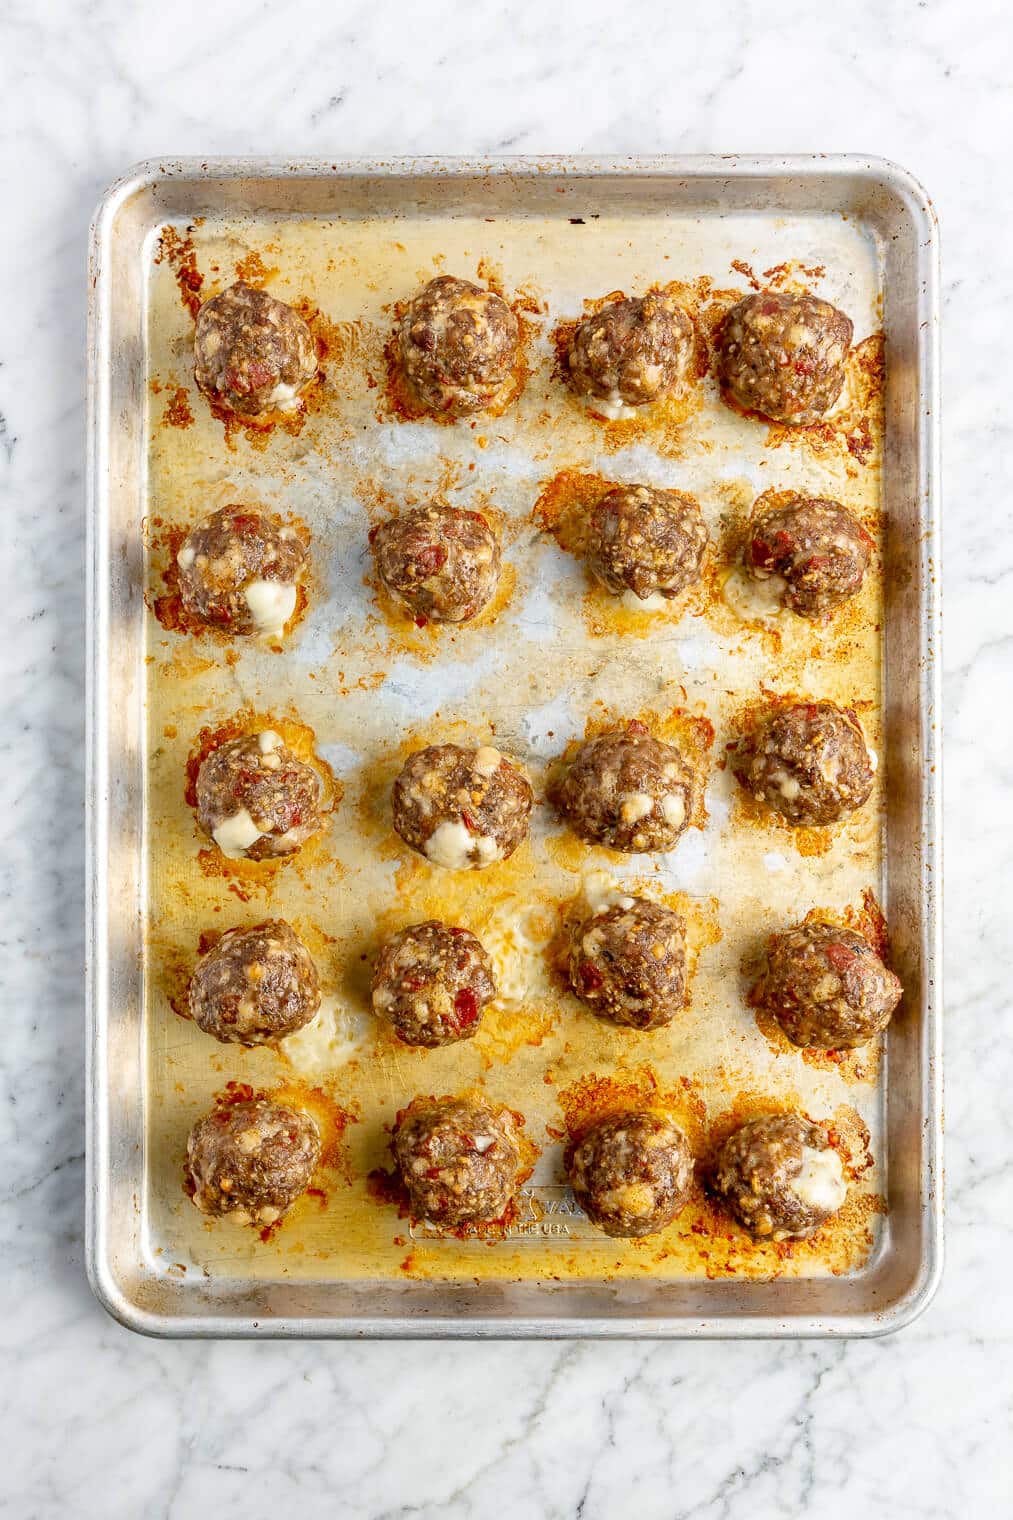 20 cooked pizza meatballs in rows on a sheet pan.